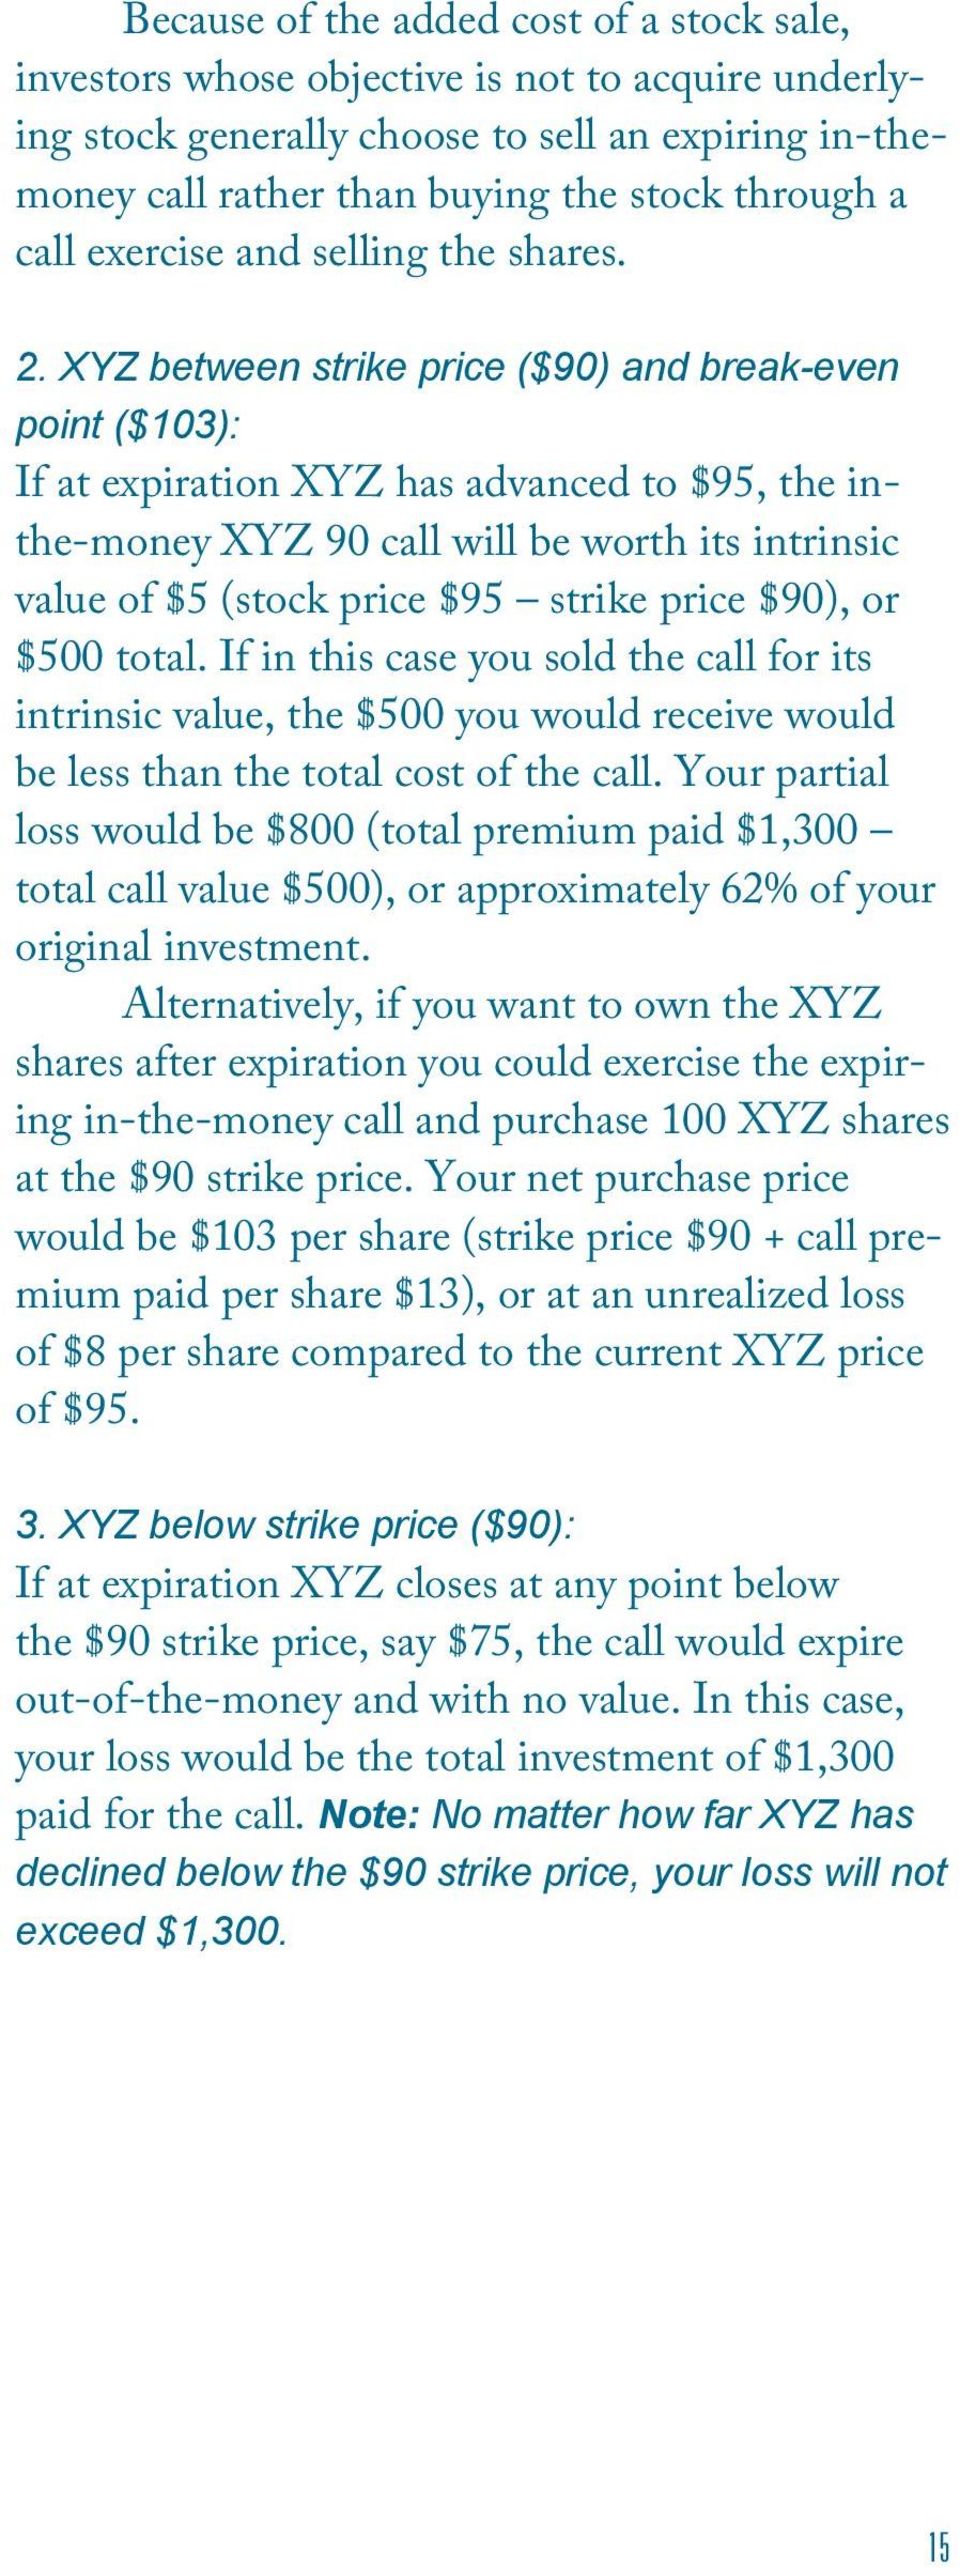 XYZ between strike price ($90) and break-even point ($103): If at expiration XYZ has advanced to $95, the inthe-money XYZ 90 call will be worth its intrinsic value of $5 (stock price $95 strike price